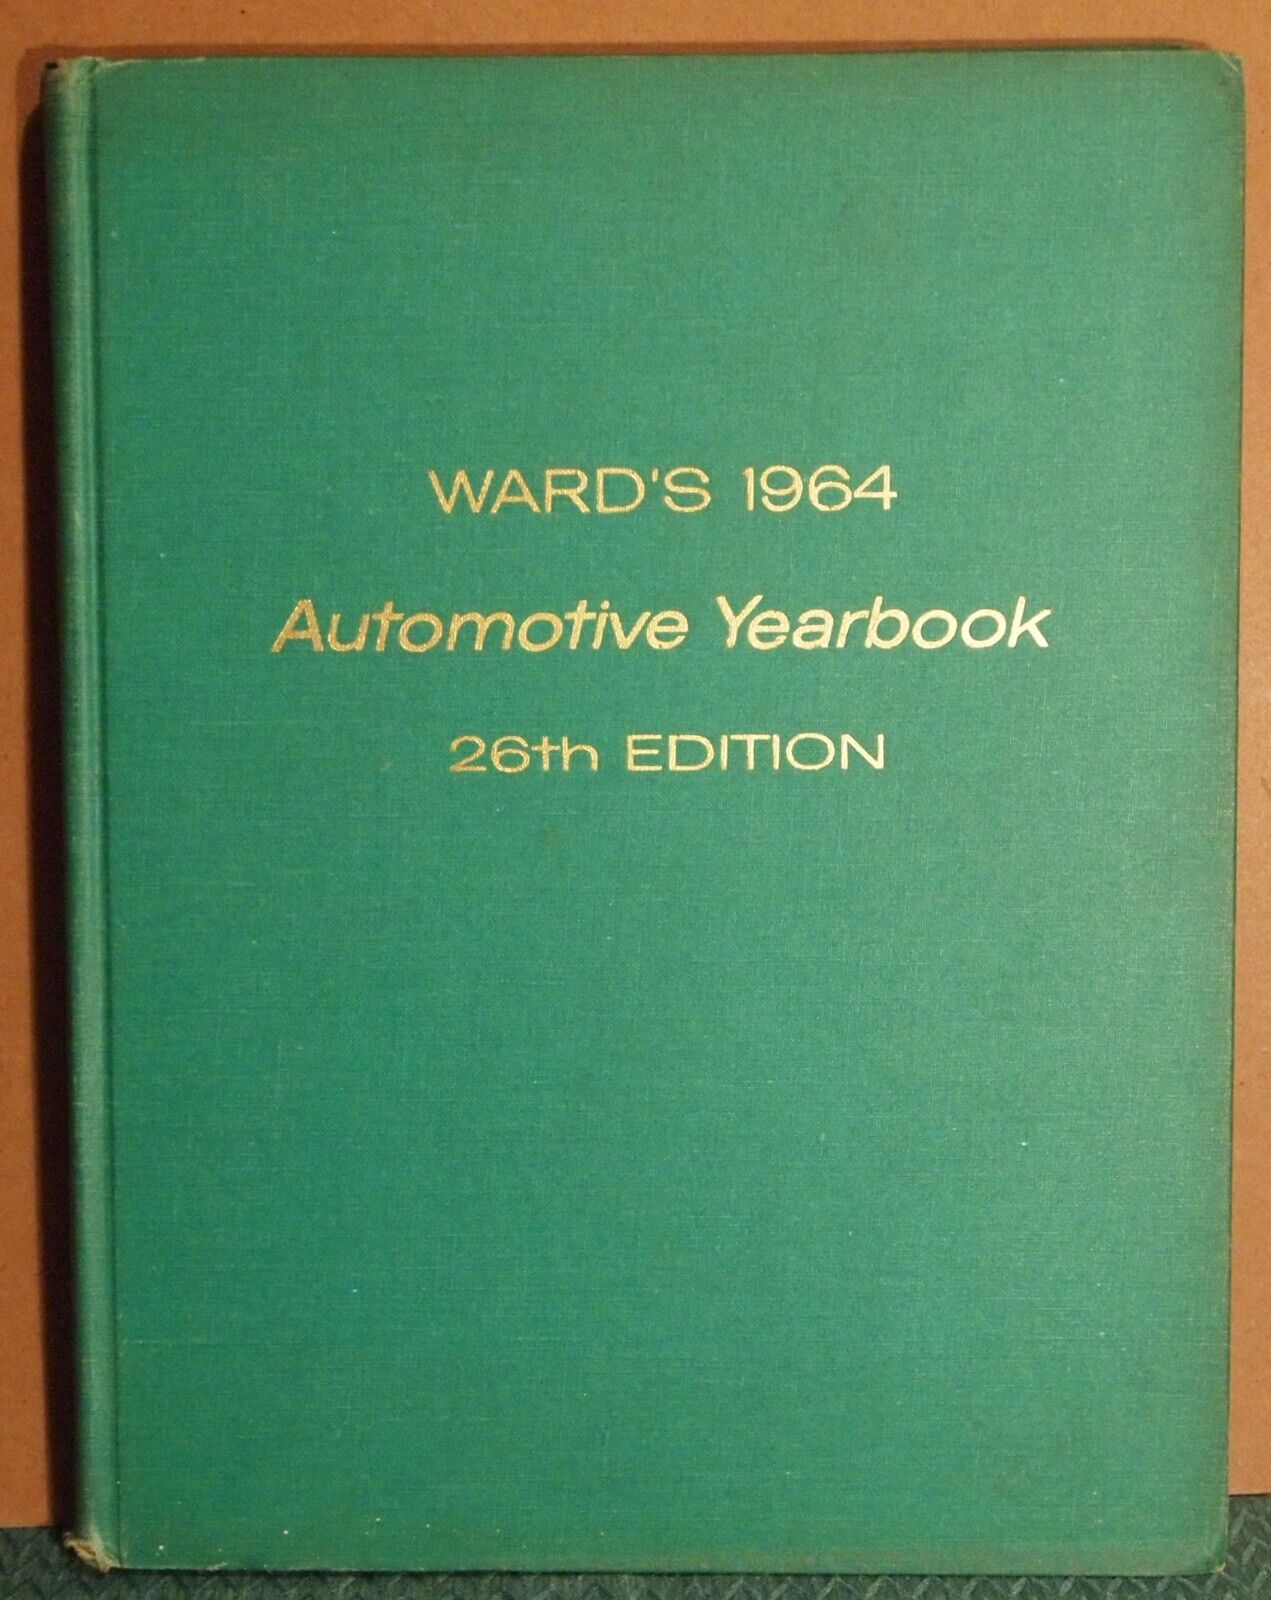 1964 WARD\'S AUTOMOTIVE YEARBOOK 26th edition WARDS-18